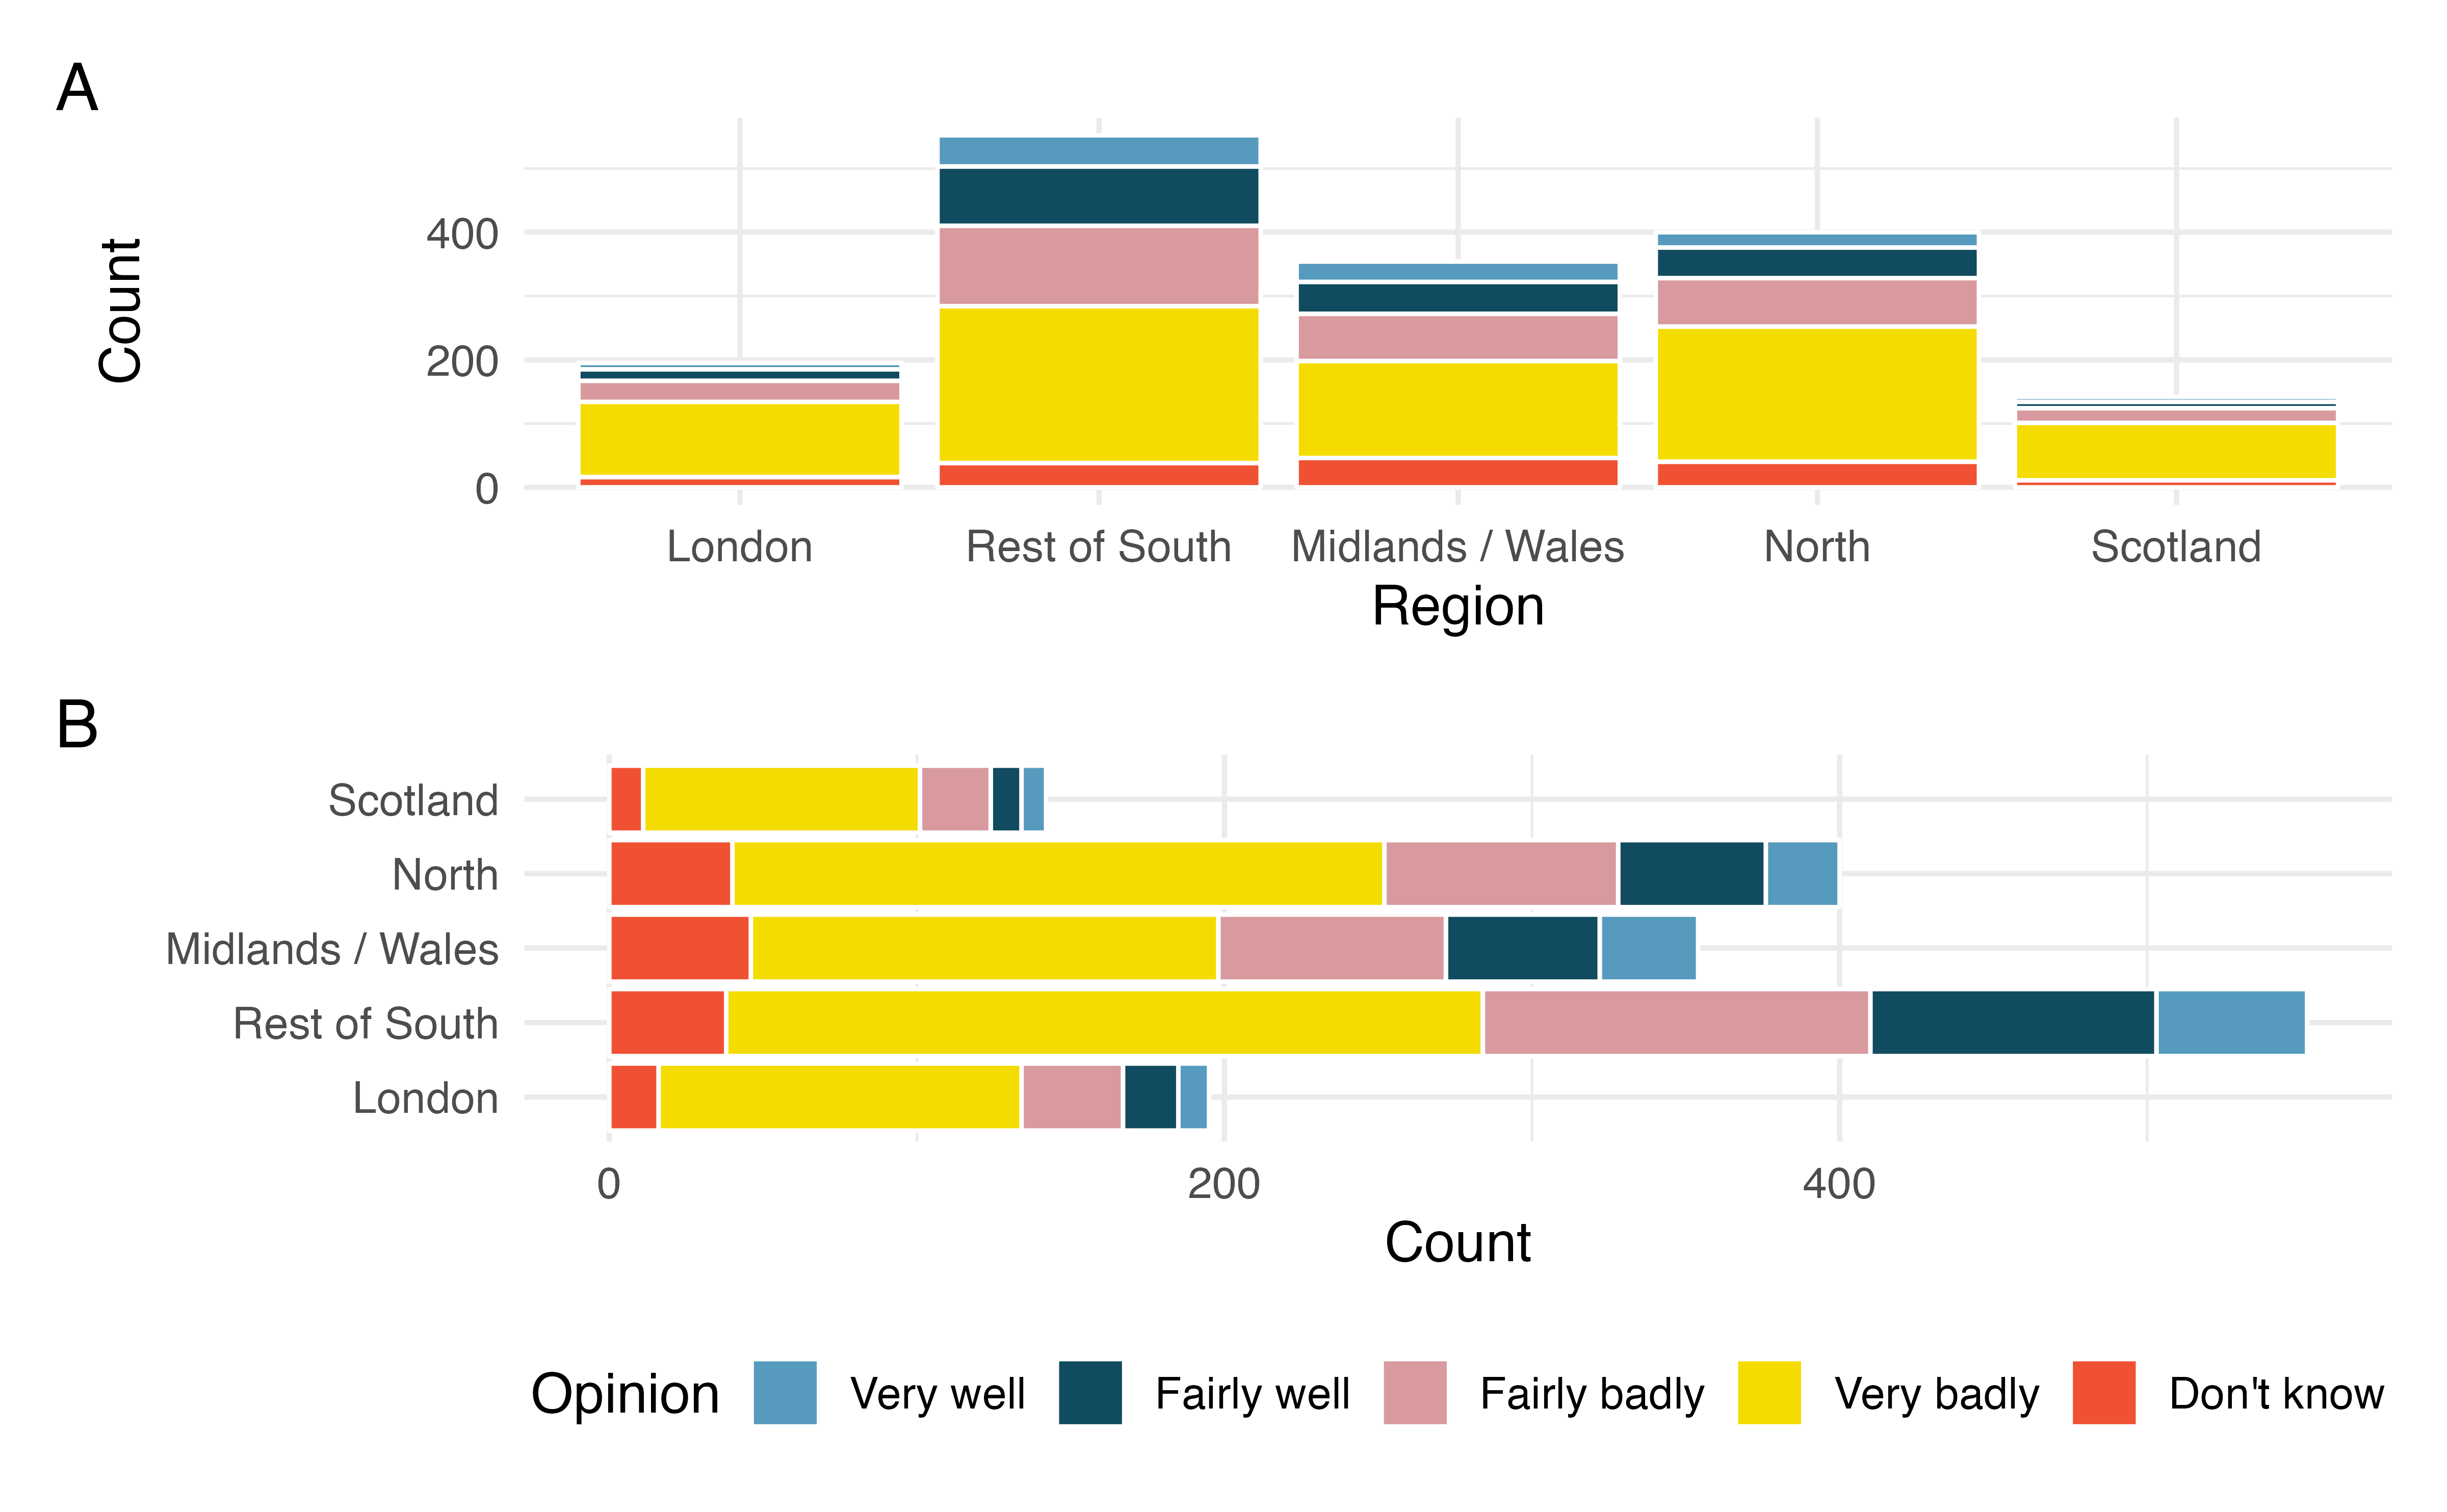 Stacked bar plots vertically and horizontally. The horizontal orientation makes the region labels easier to read.